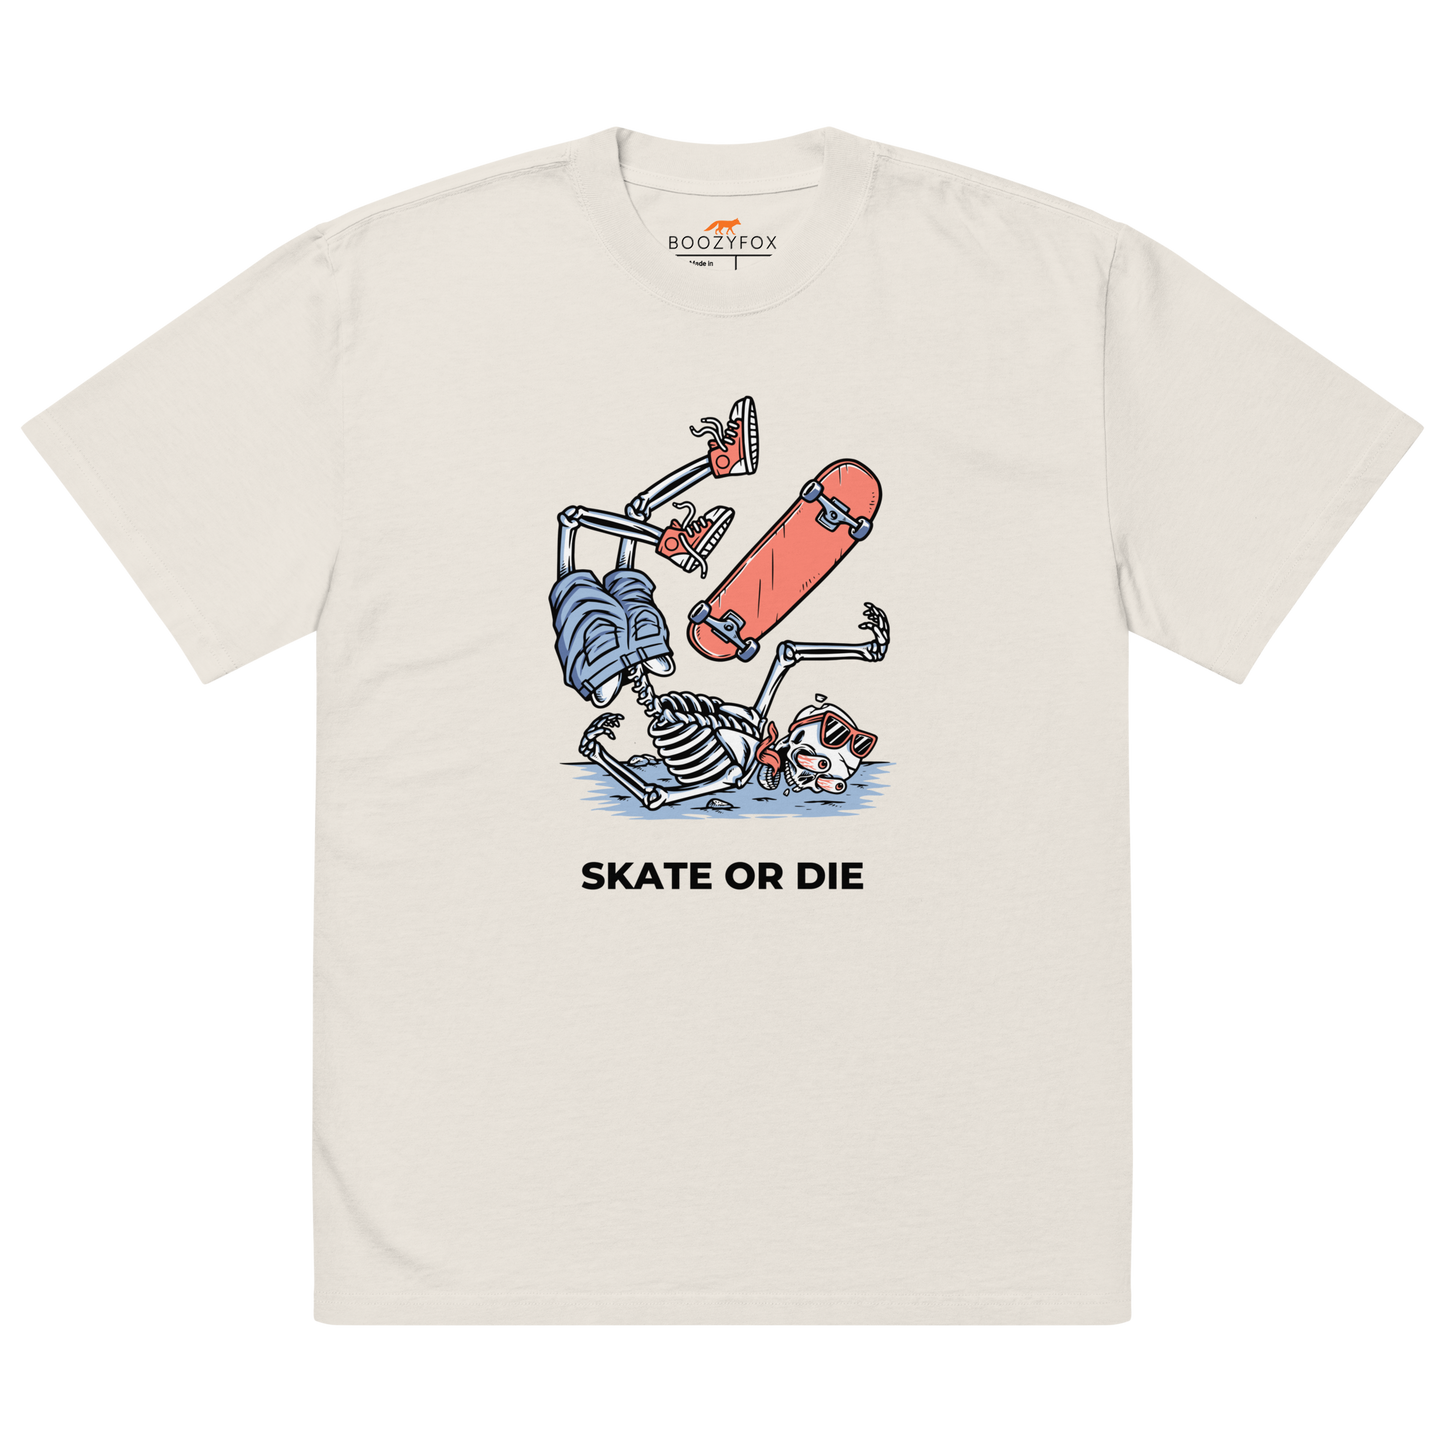 Faded Bone Skate or Die Oversized T-Shirt featuring a fearless Skeleton Falling While Skateboarding graphic on the chest - Cool Graphic Skeleton Oversized Tees - Boozy Fox